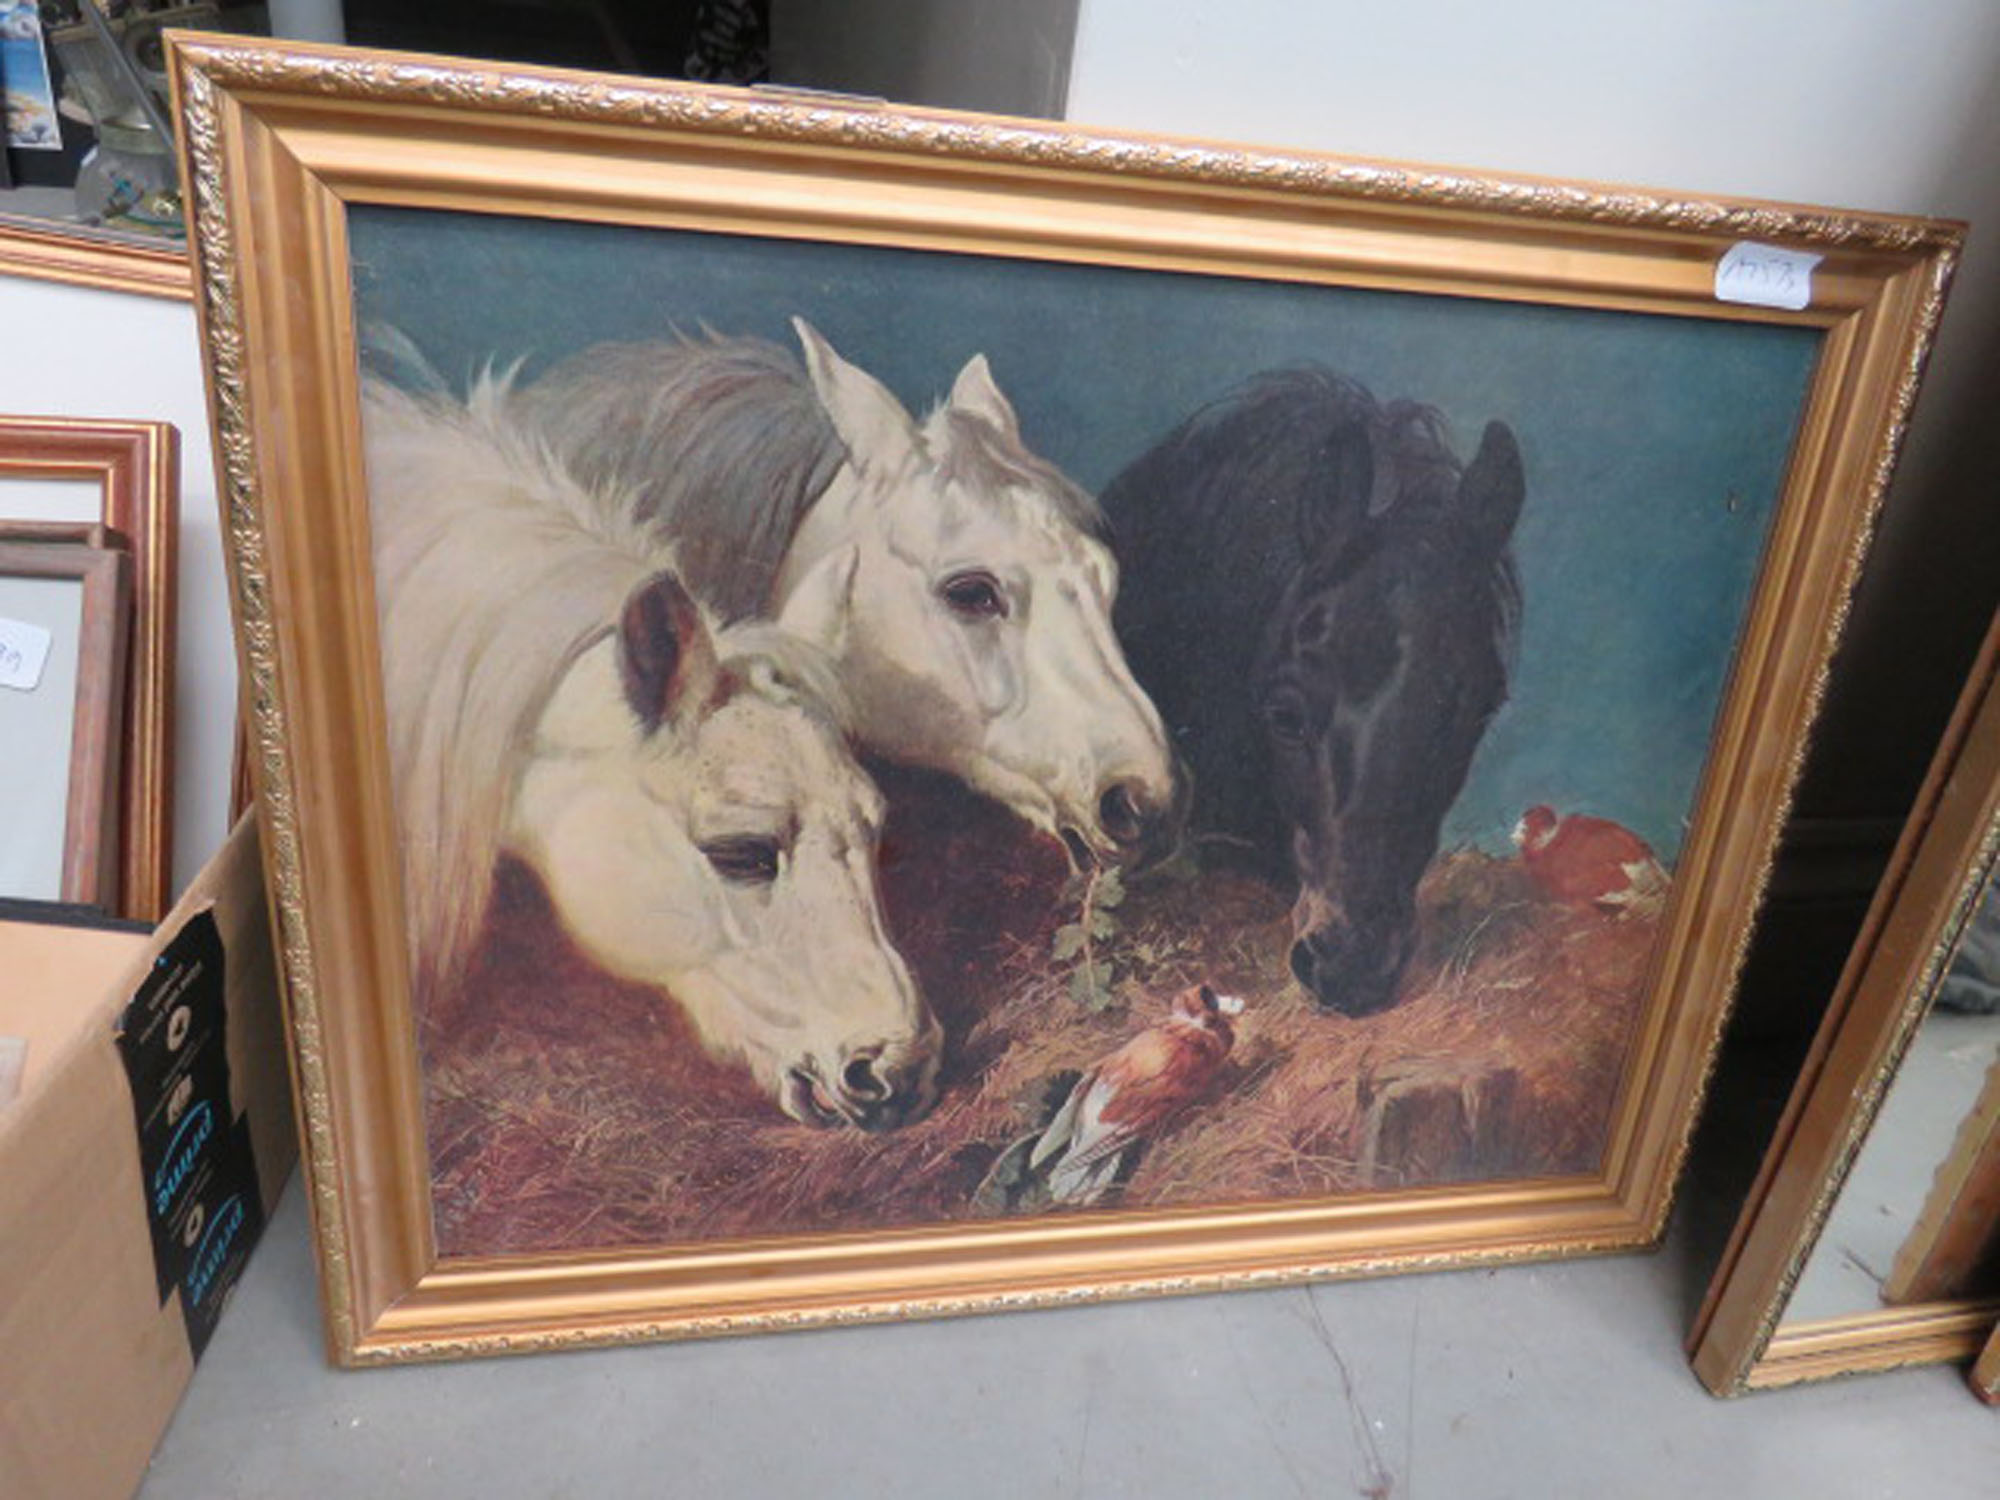 Print with horses in stable